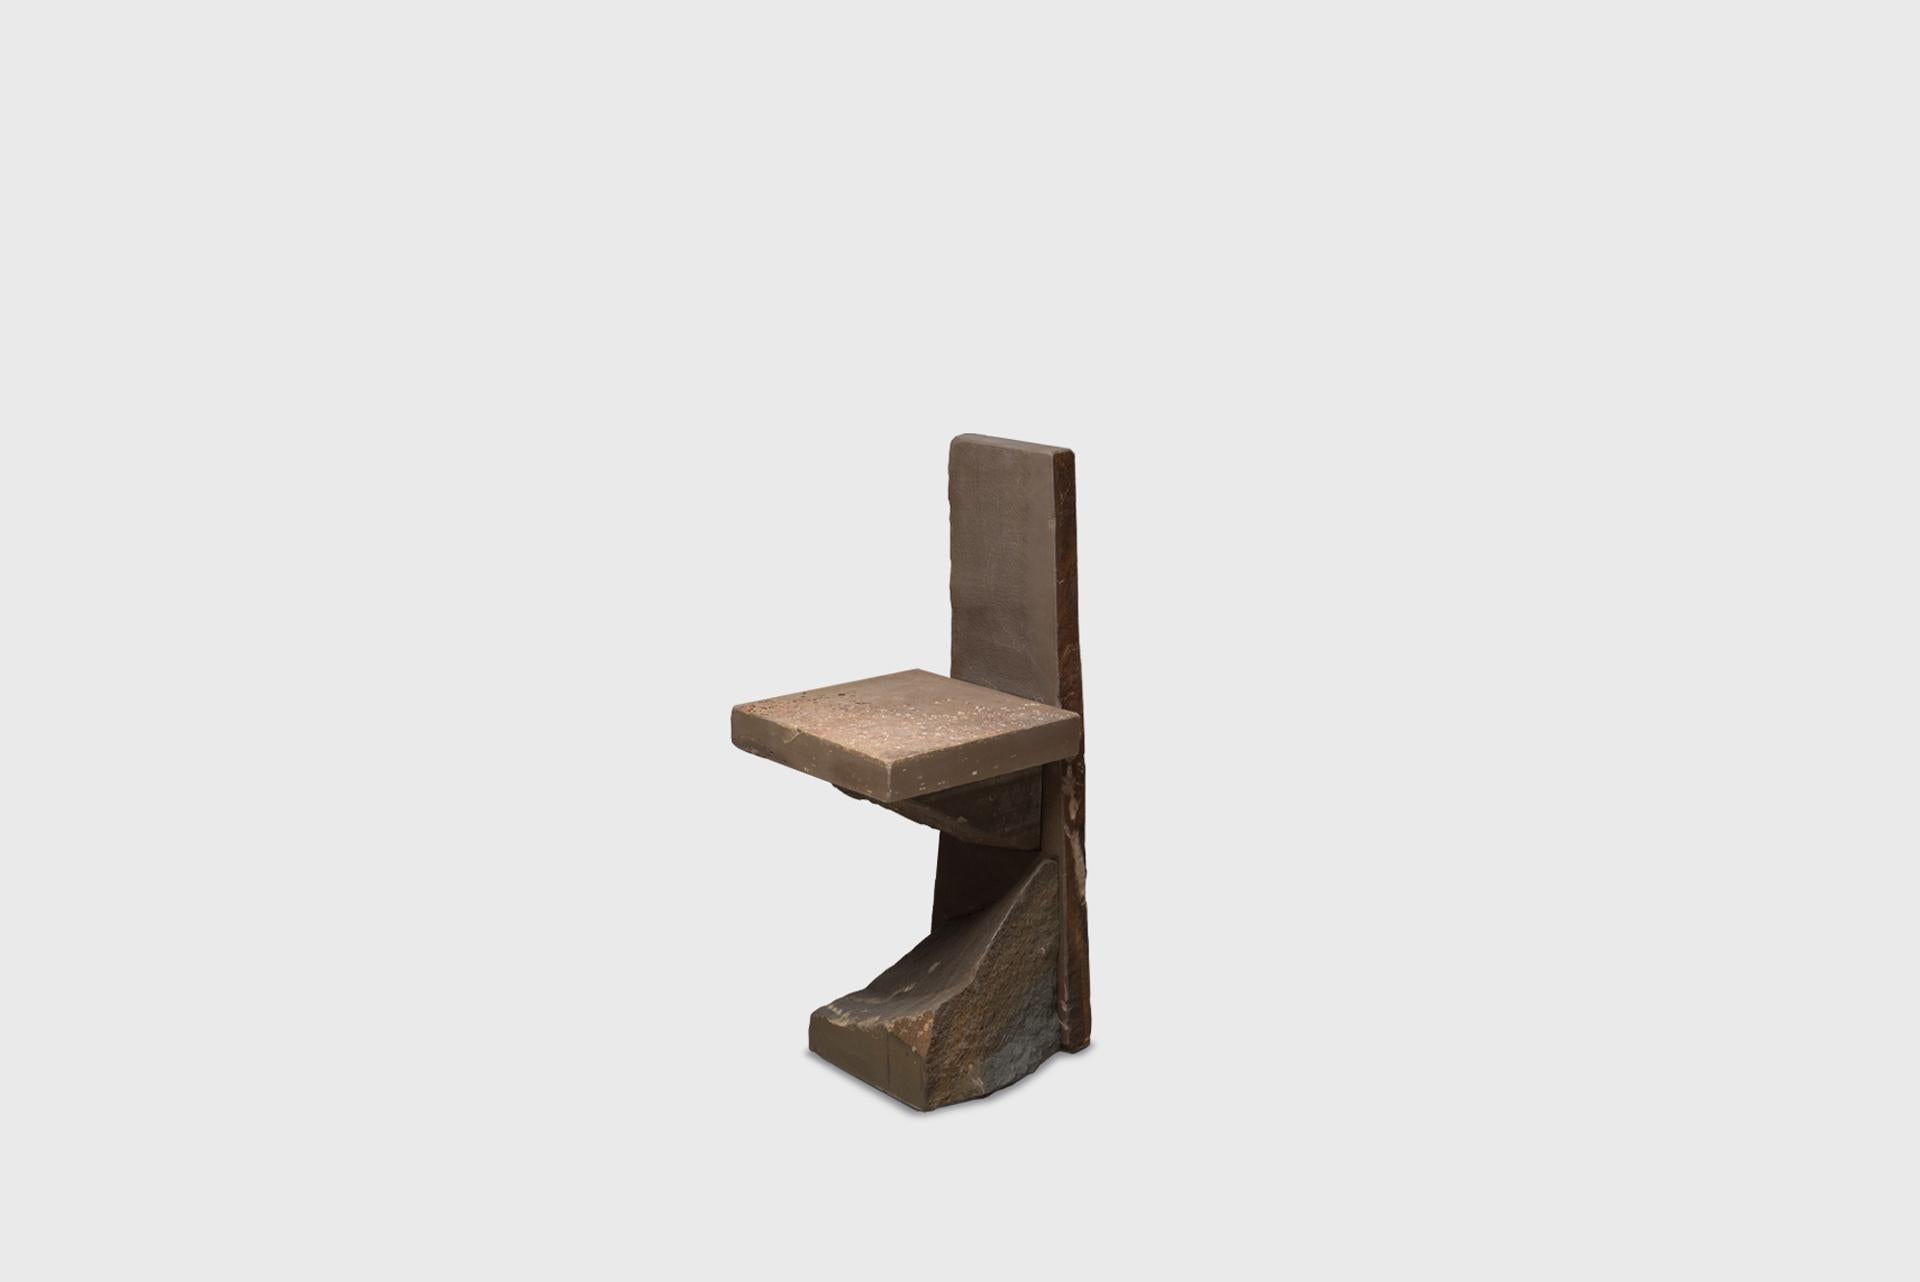 Contemporary Natural Chair 21, Graywacke Offcut Gray Stone, Carsten in Der Elst For Sale 3